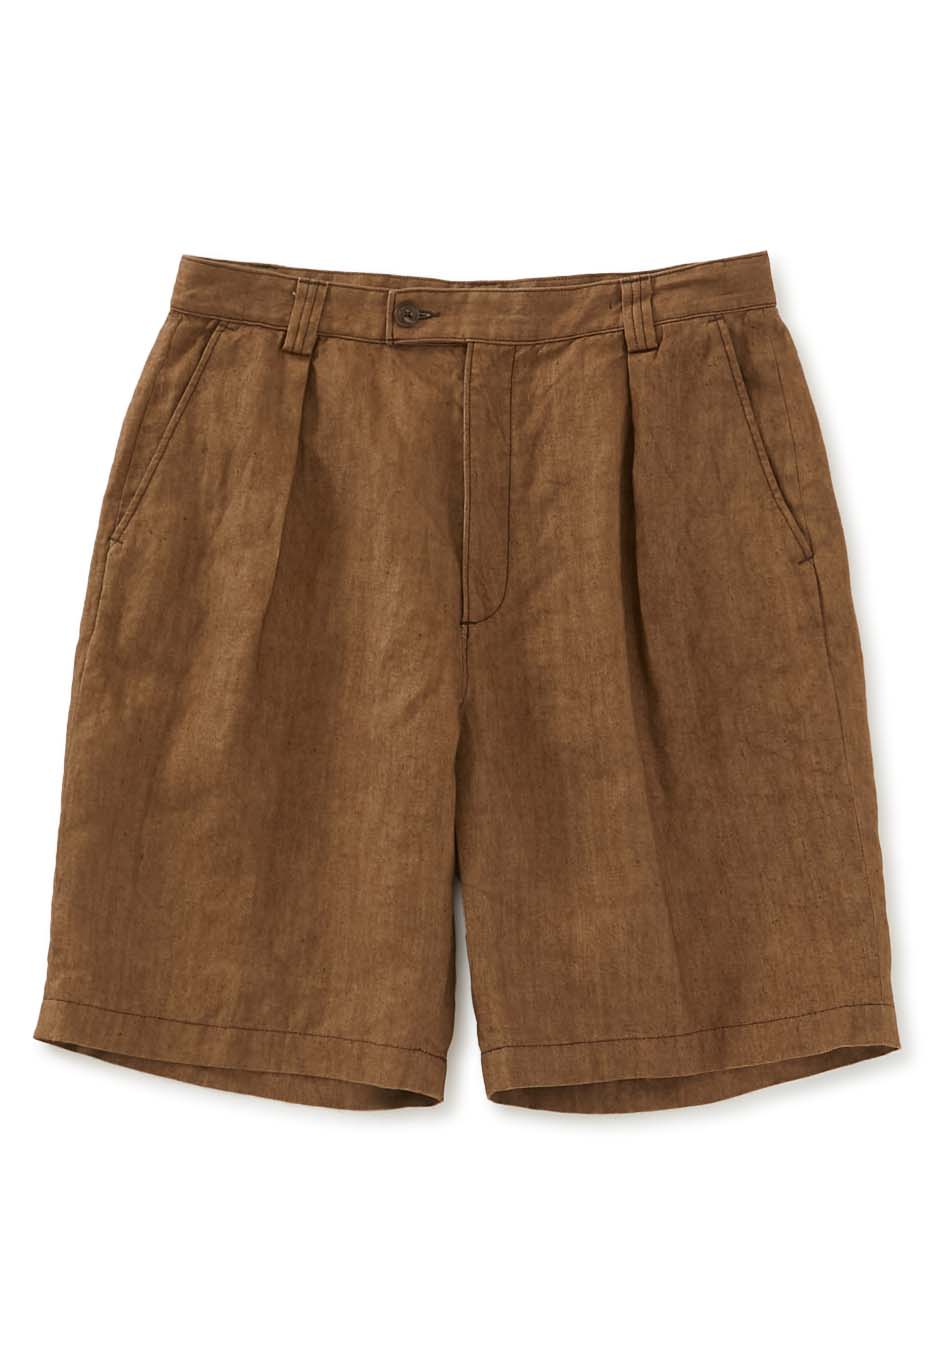 Sulfur linen canvas one-tuck shorts